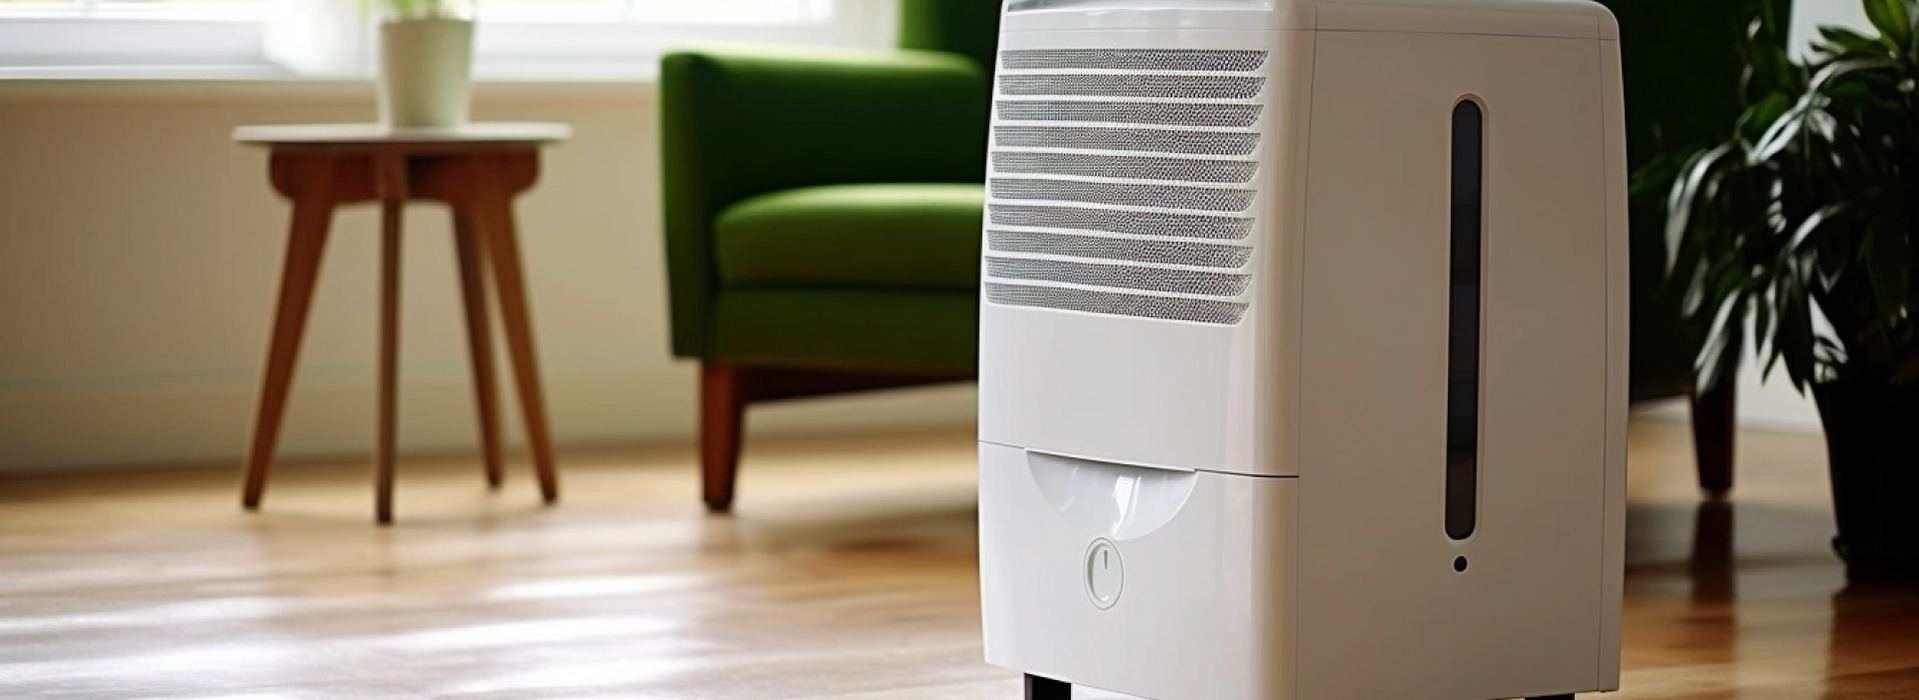 How To Save Your Energy With Energy Efficient Dehumidifier